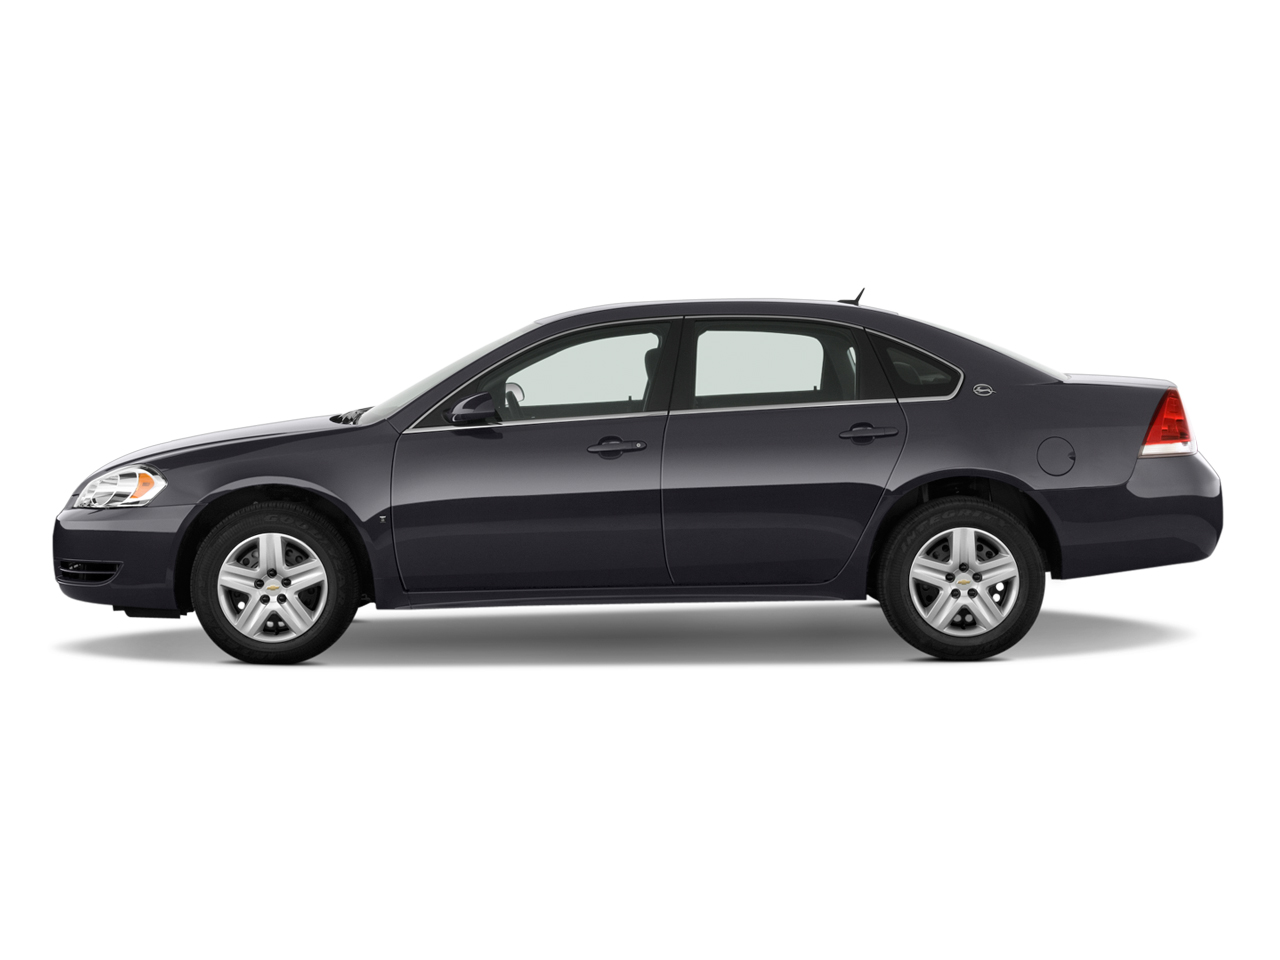 2011 Chevrolet Impala prices and expert review - The Car Connection